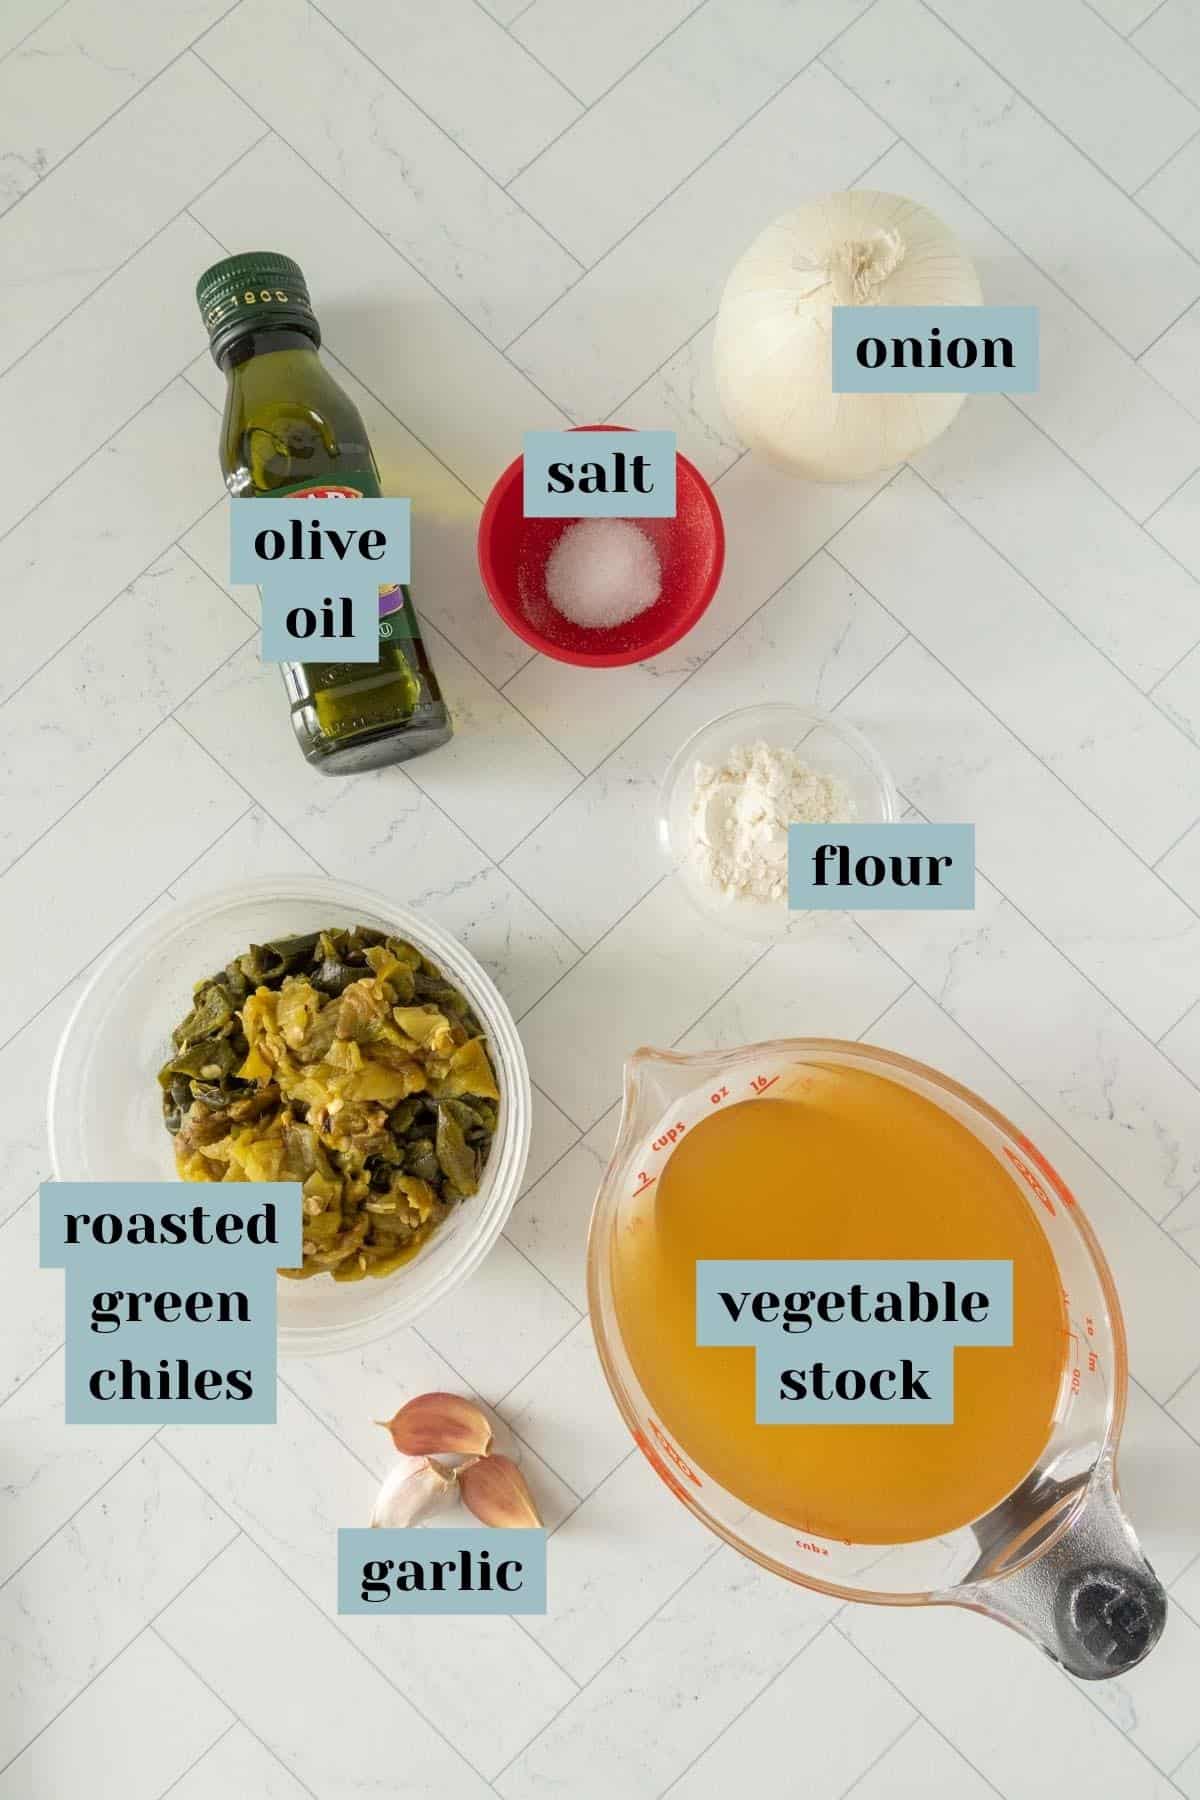 Olive oil, garlic, onion, and other ingredients are laid out on a marble countertop.